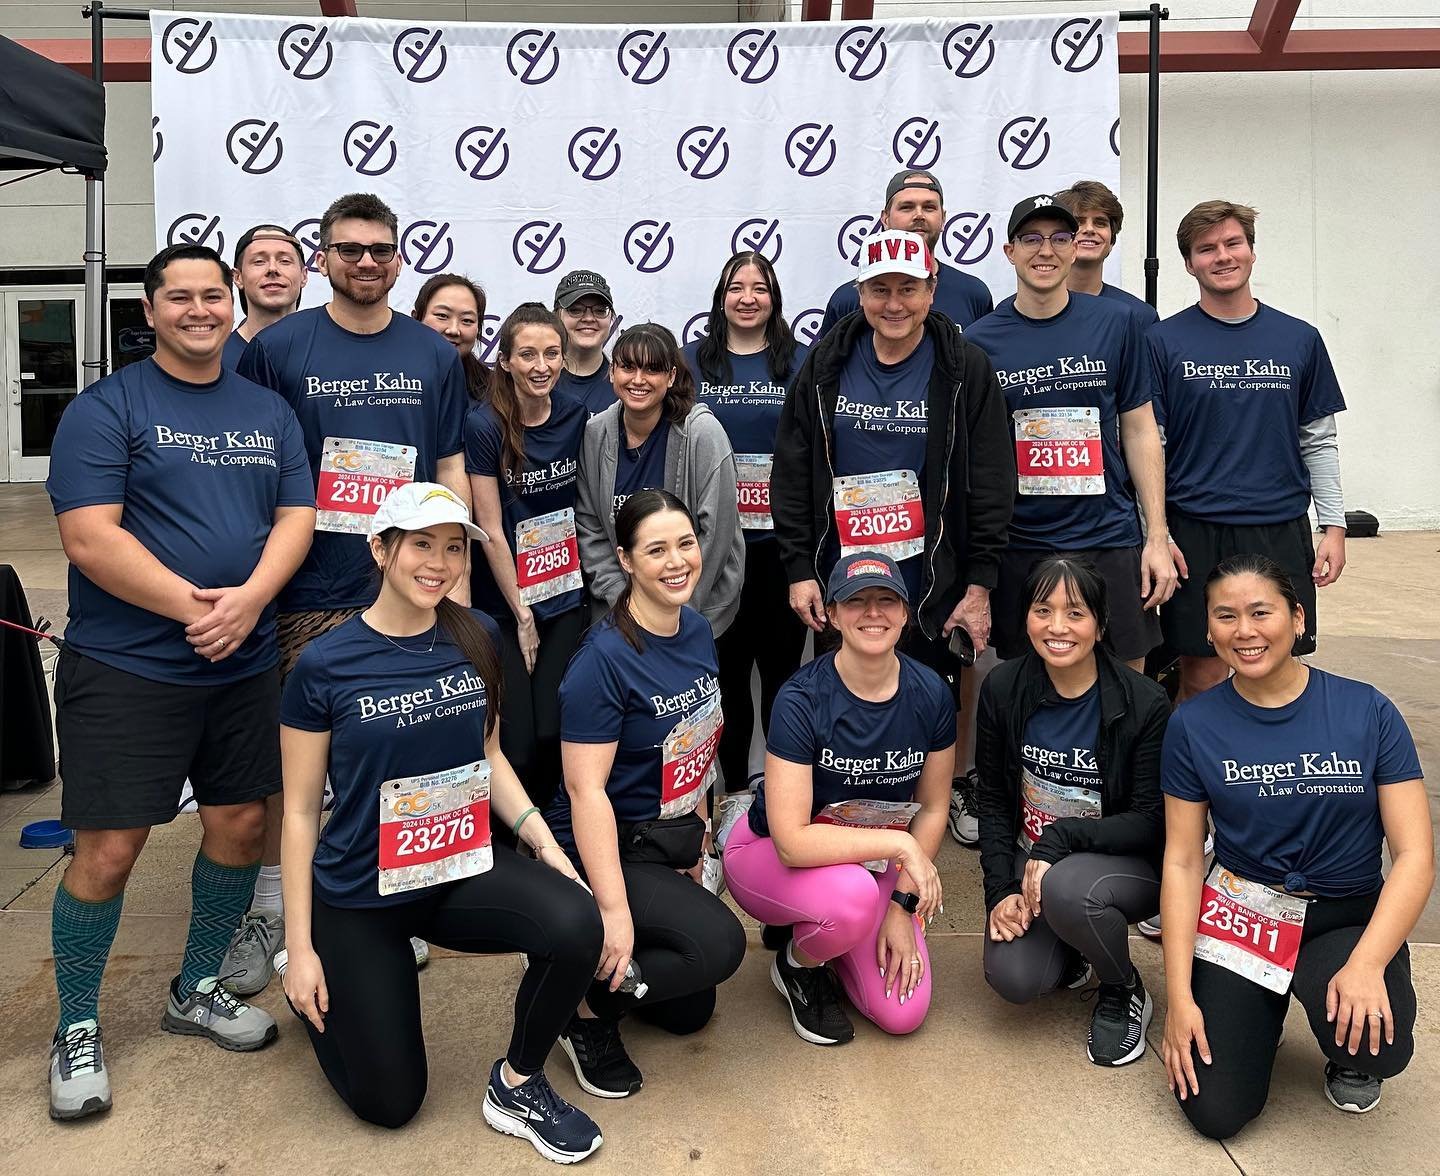 Berger Kahn South OC Participates with Project Youth OC at the 2024 OC Marathon
 
On May 4, 2024, Berger Kahn returned to participate in the 2024 OC Marathon. 
 
In our biggest turnout yet, over 80% of our South OC Office ran the Celebrate OC 5K.
 
W